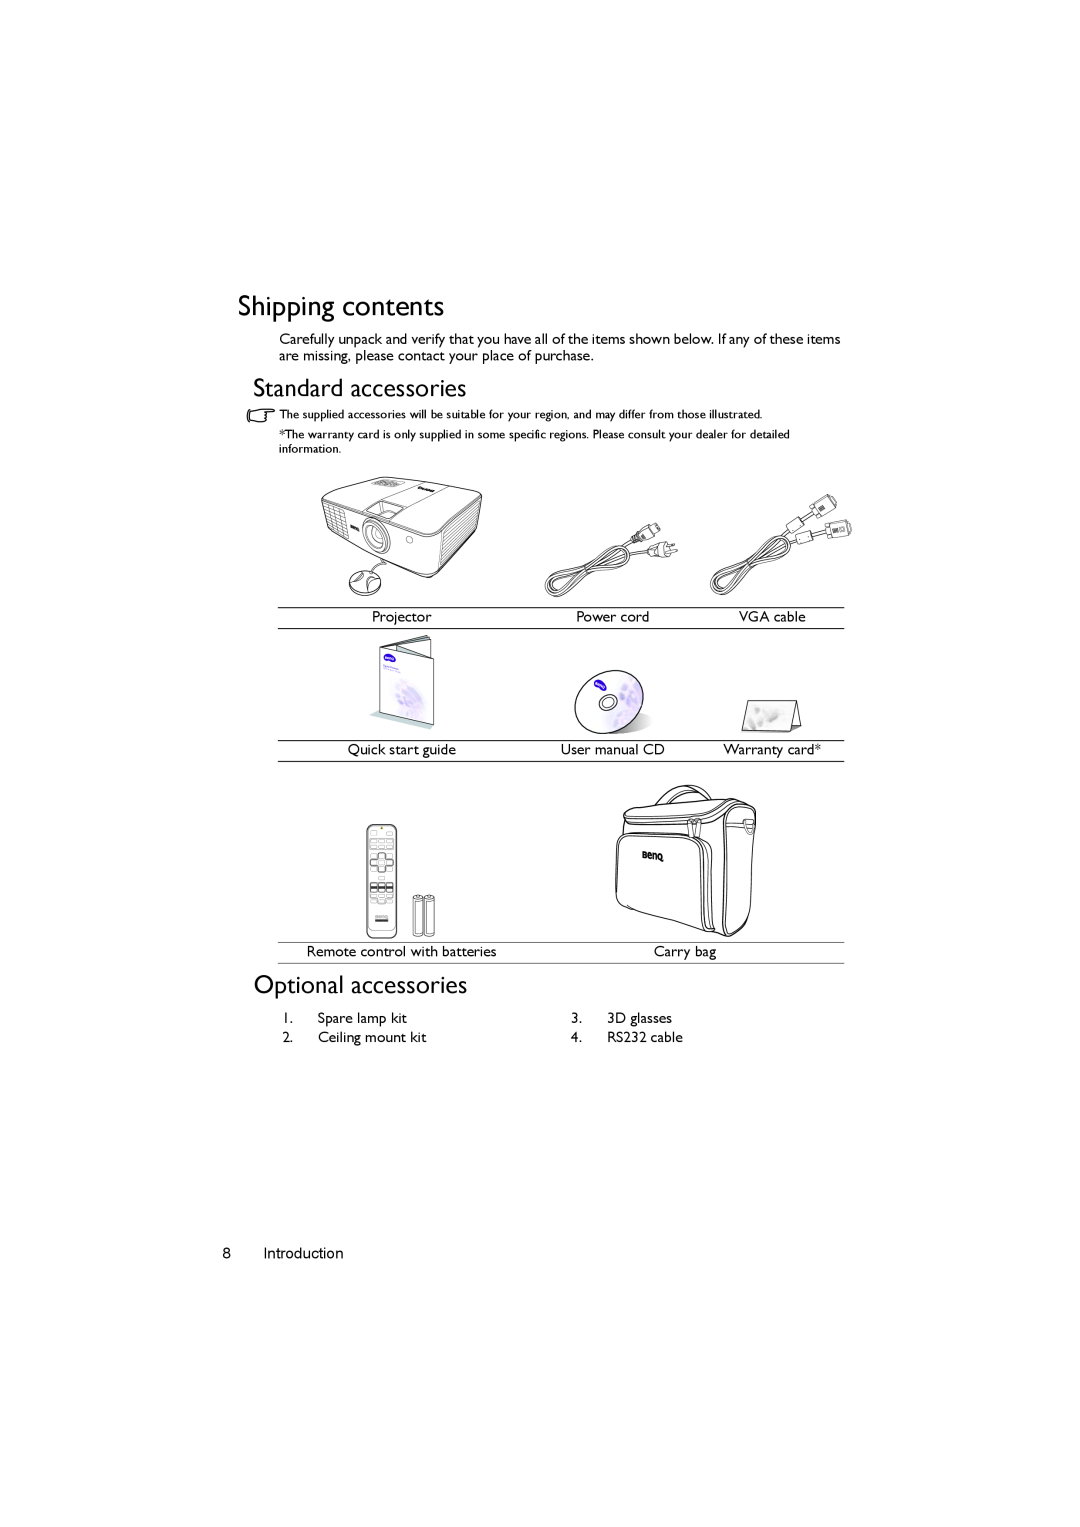 BenQ MX722 user manual Shipping contents, Standard accessories, Optional accessories 